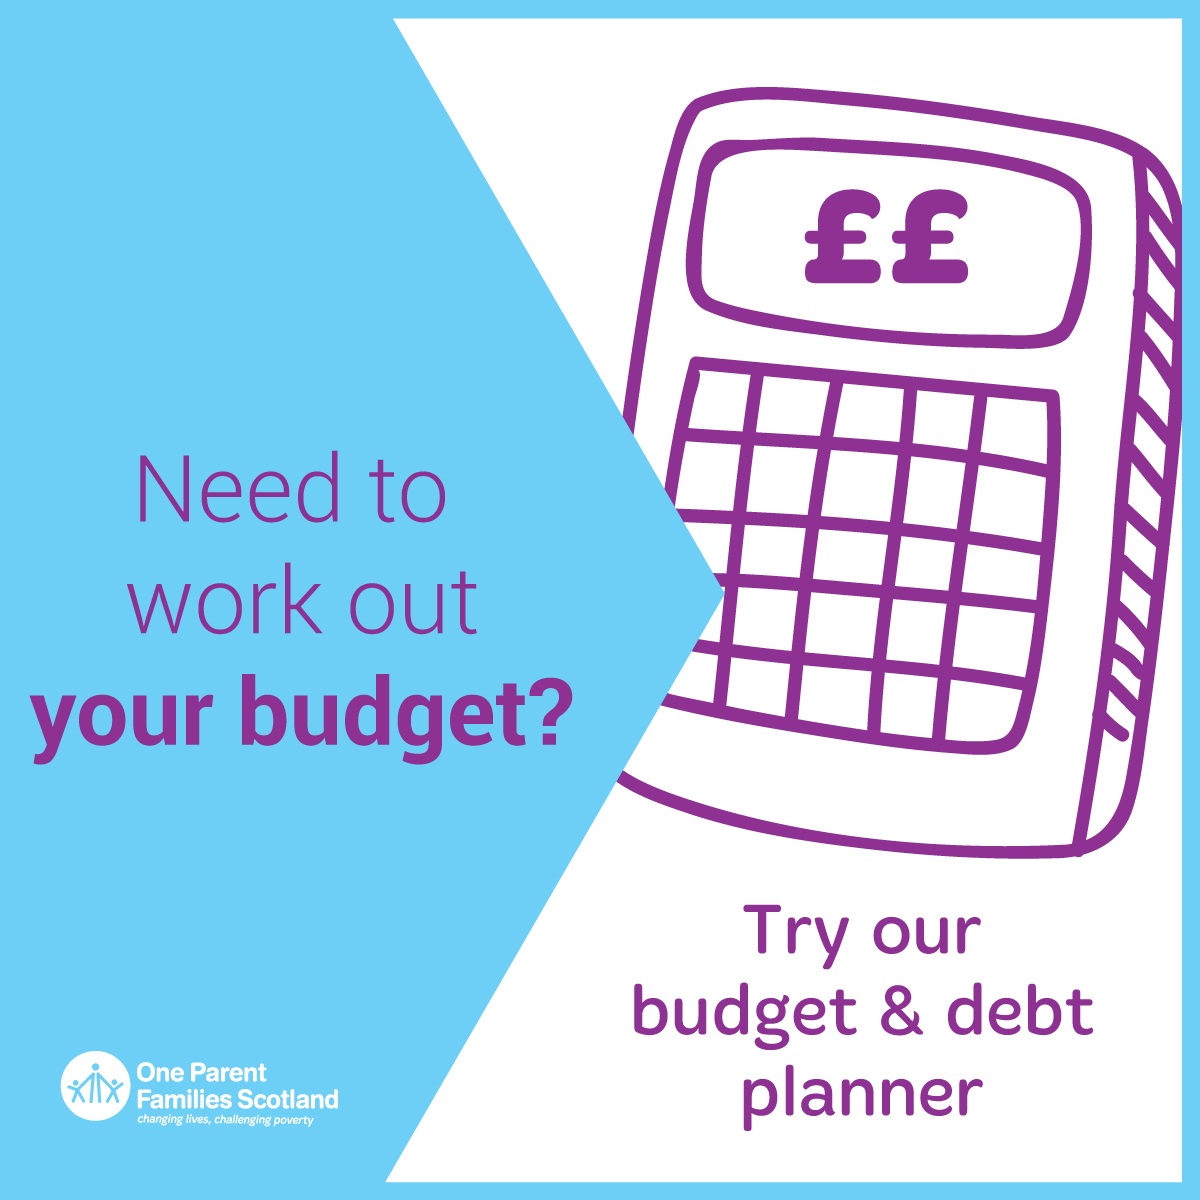 Visit our budgeting tool